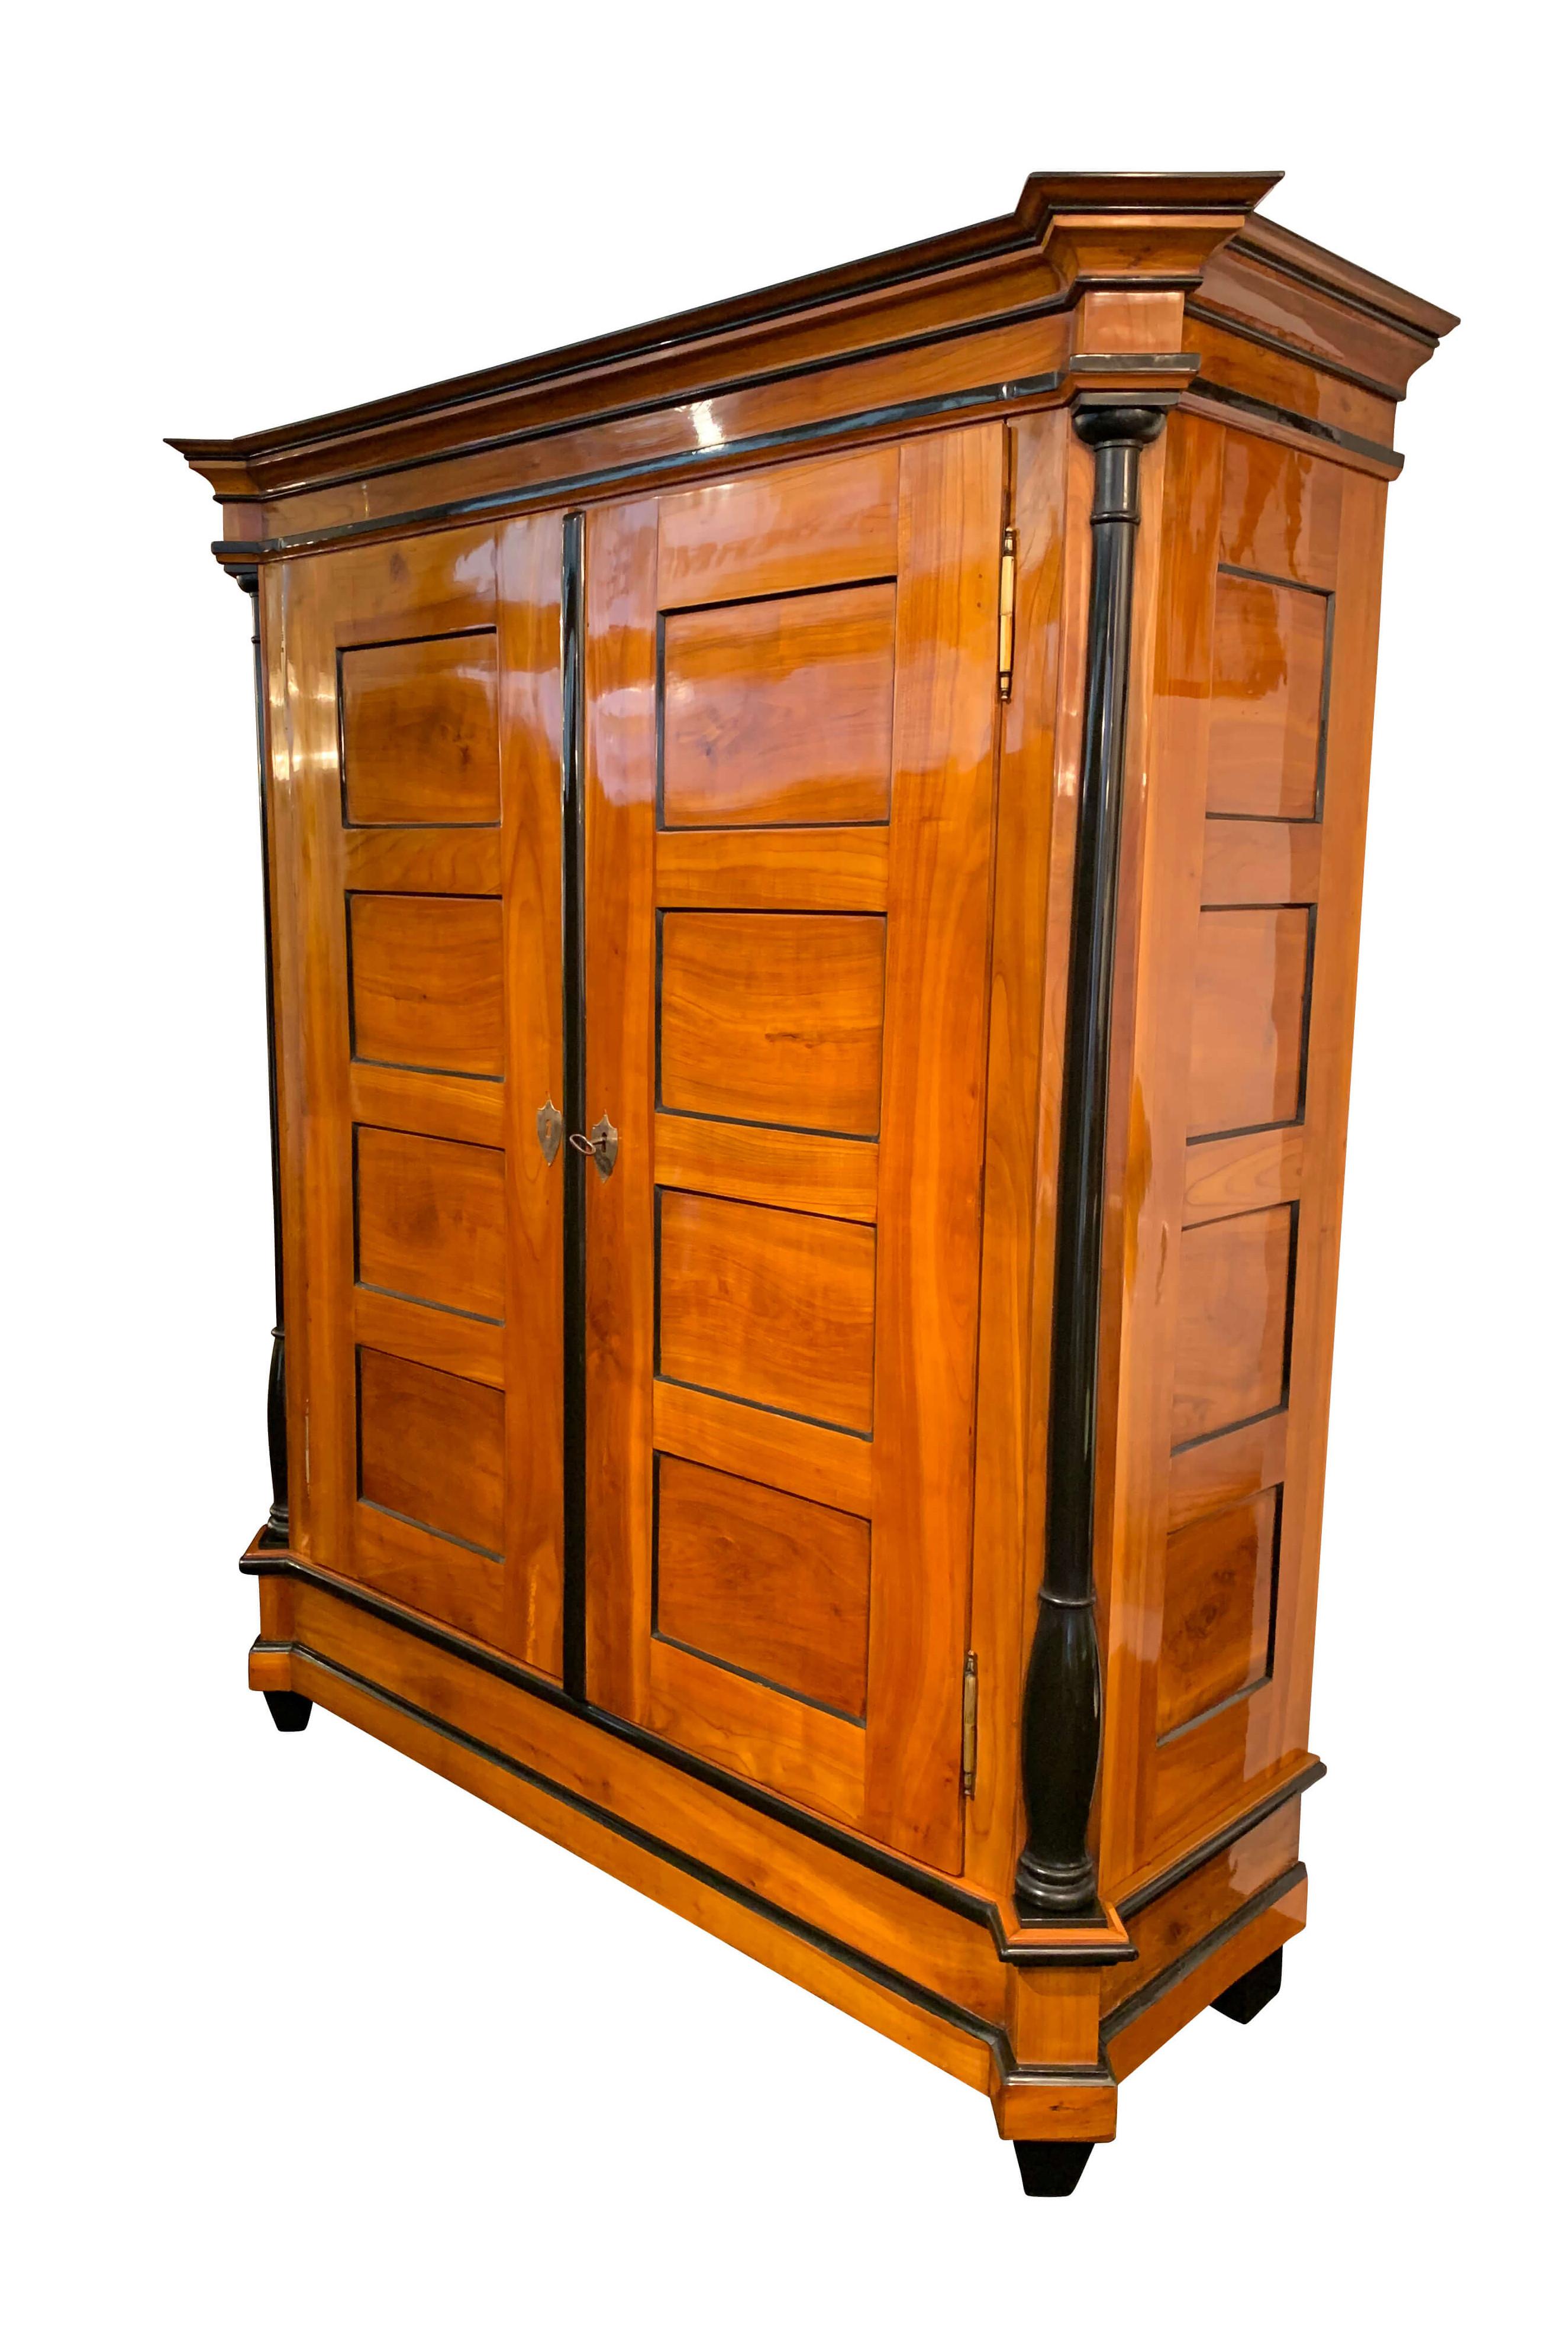 Stately, large Biedermeier armoire or wardrobe in cherry solid wood from Southwest Germany, circa 1820.

Solid cherry tree, hand-polished with shellac (French polish). Some ebonized parts, including three-quarter columns at the corners.
Beautiful